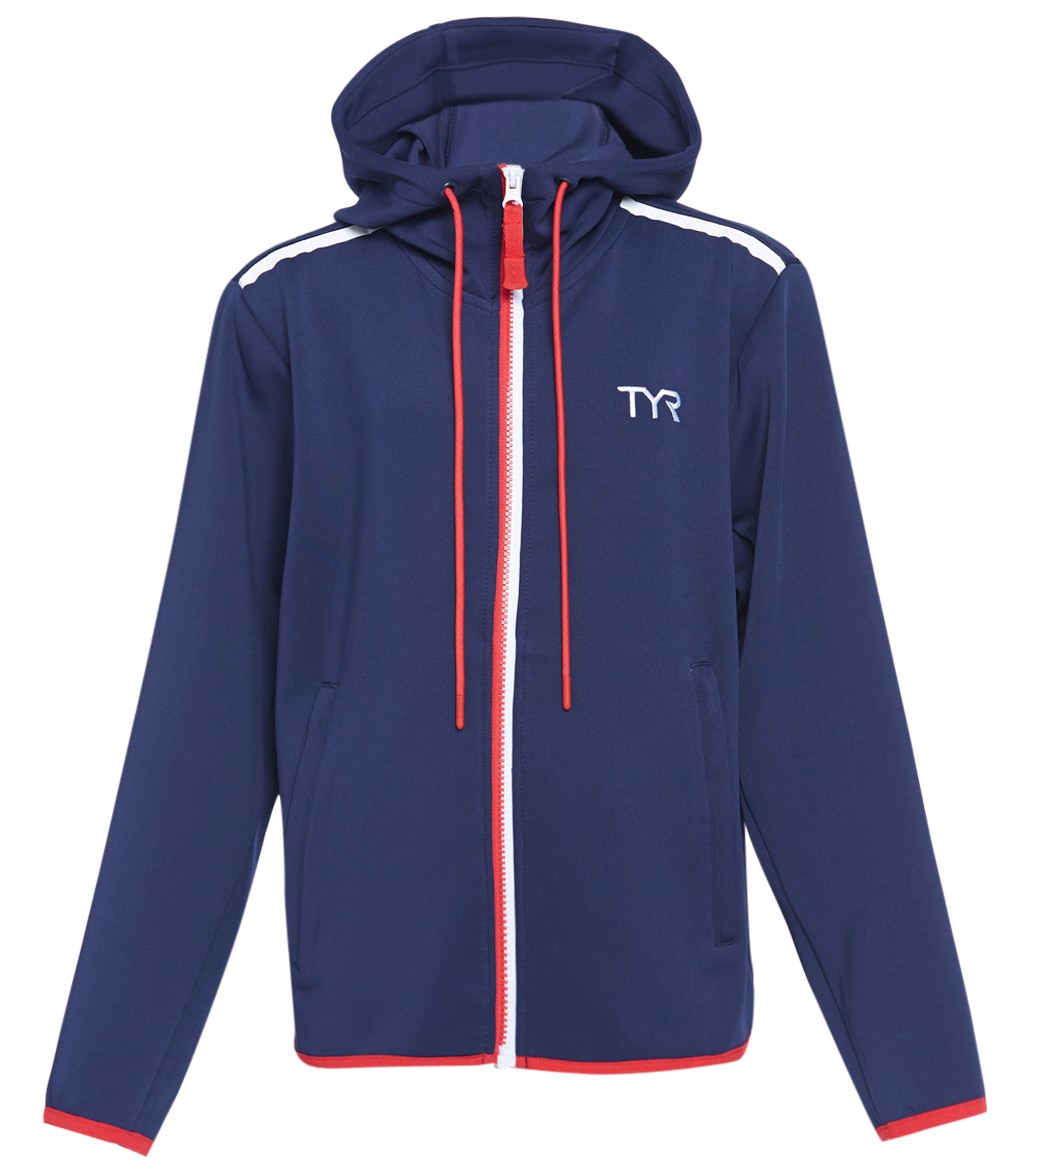 TYR Men's Youth Team Zip Hoodie - Red/White/Blue Medium Size Medium Polyester - Swimoutlet.com